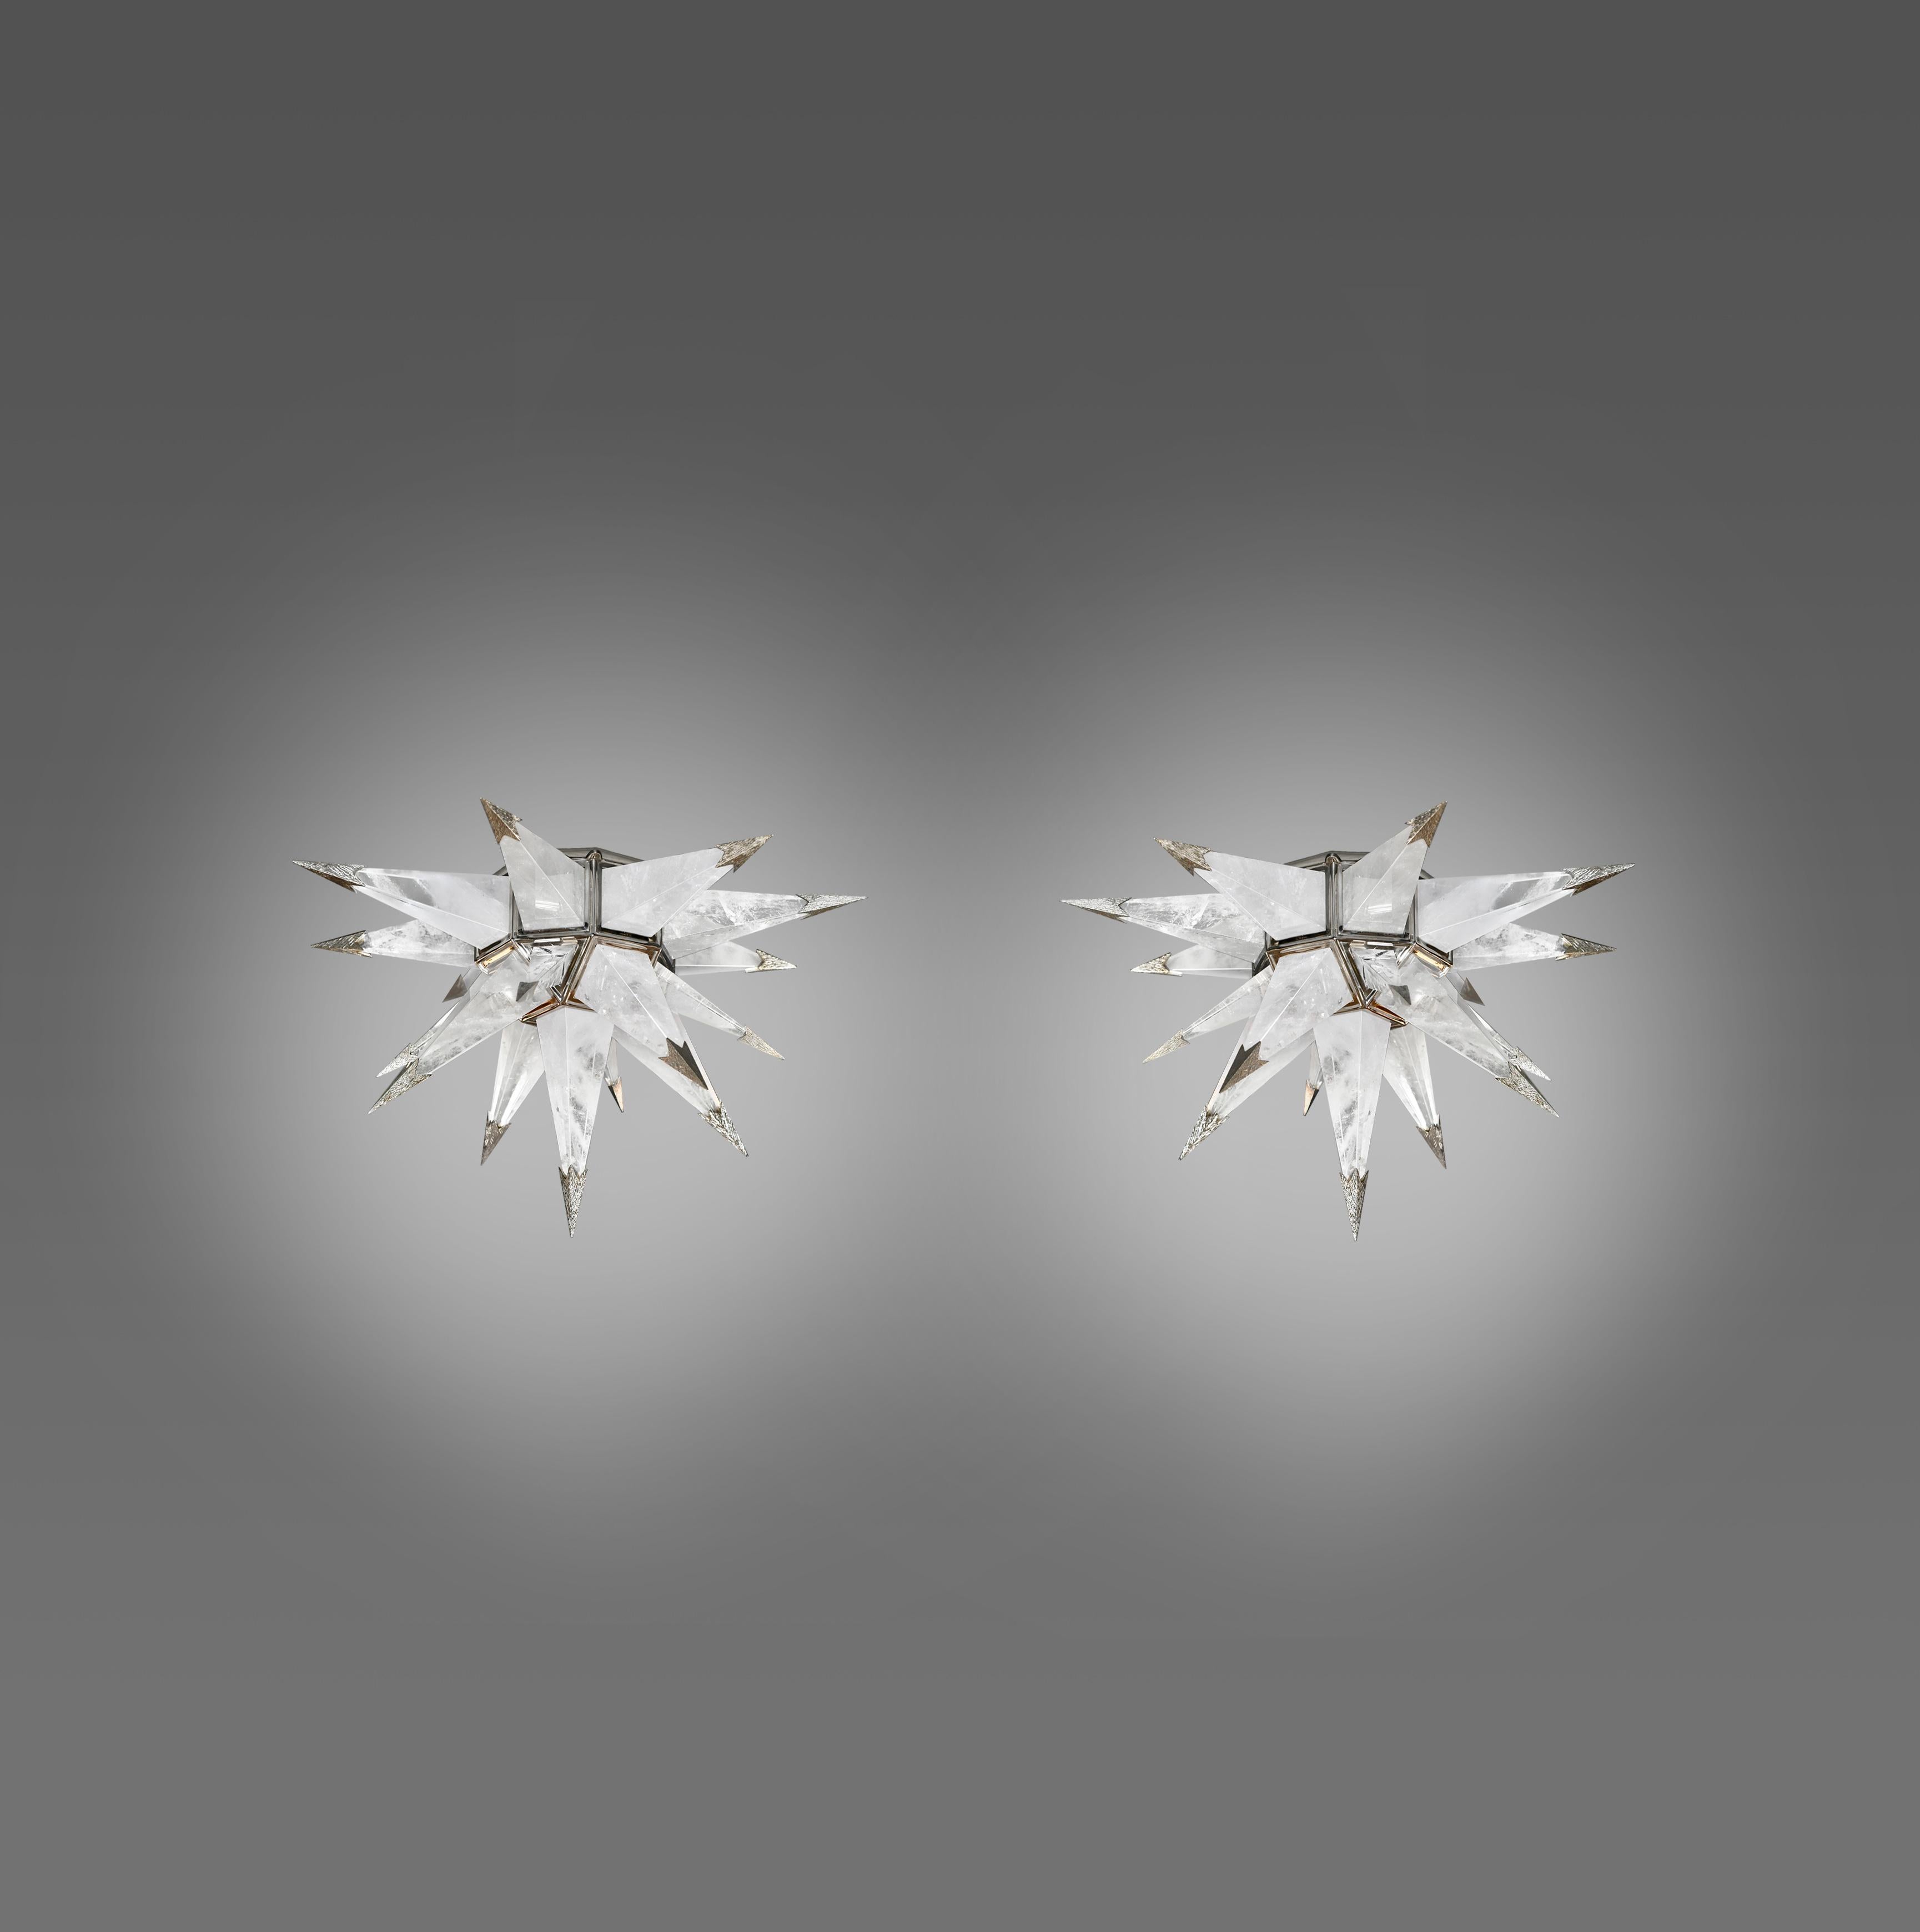 A pair of star form rock crystal flush mounts with nickel plating frame and tip. Created by Phoenix Gallery, NYC.
Each flush mount installs two sockets, uses 2 candelabra lightbulbs. 60w each, 120w in total.